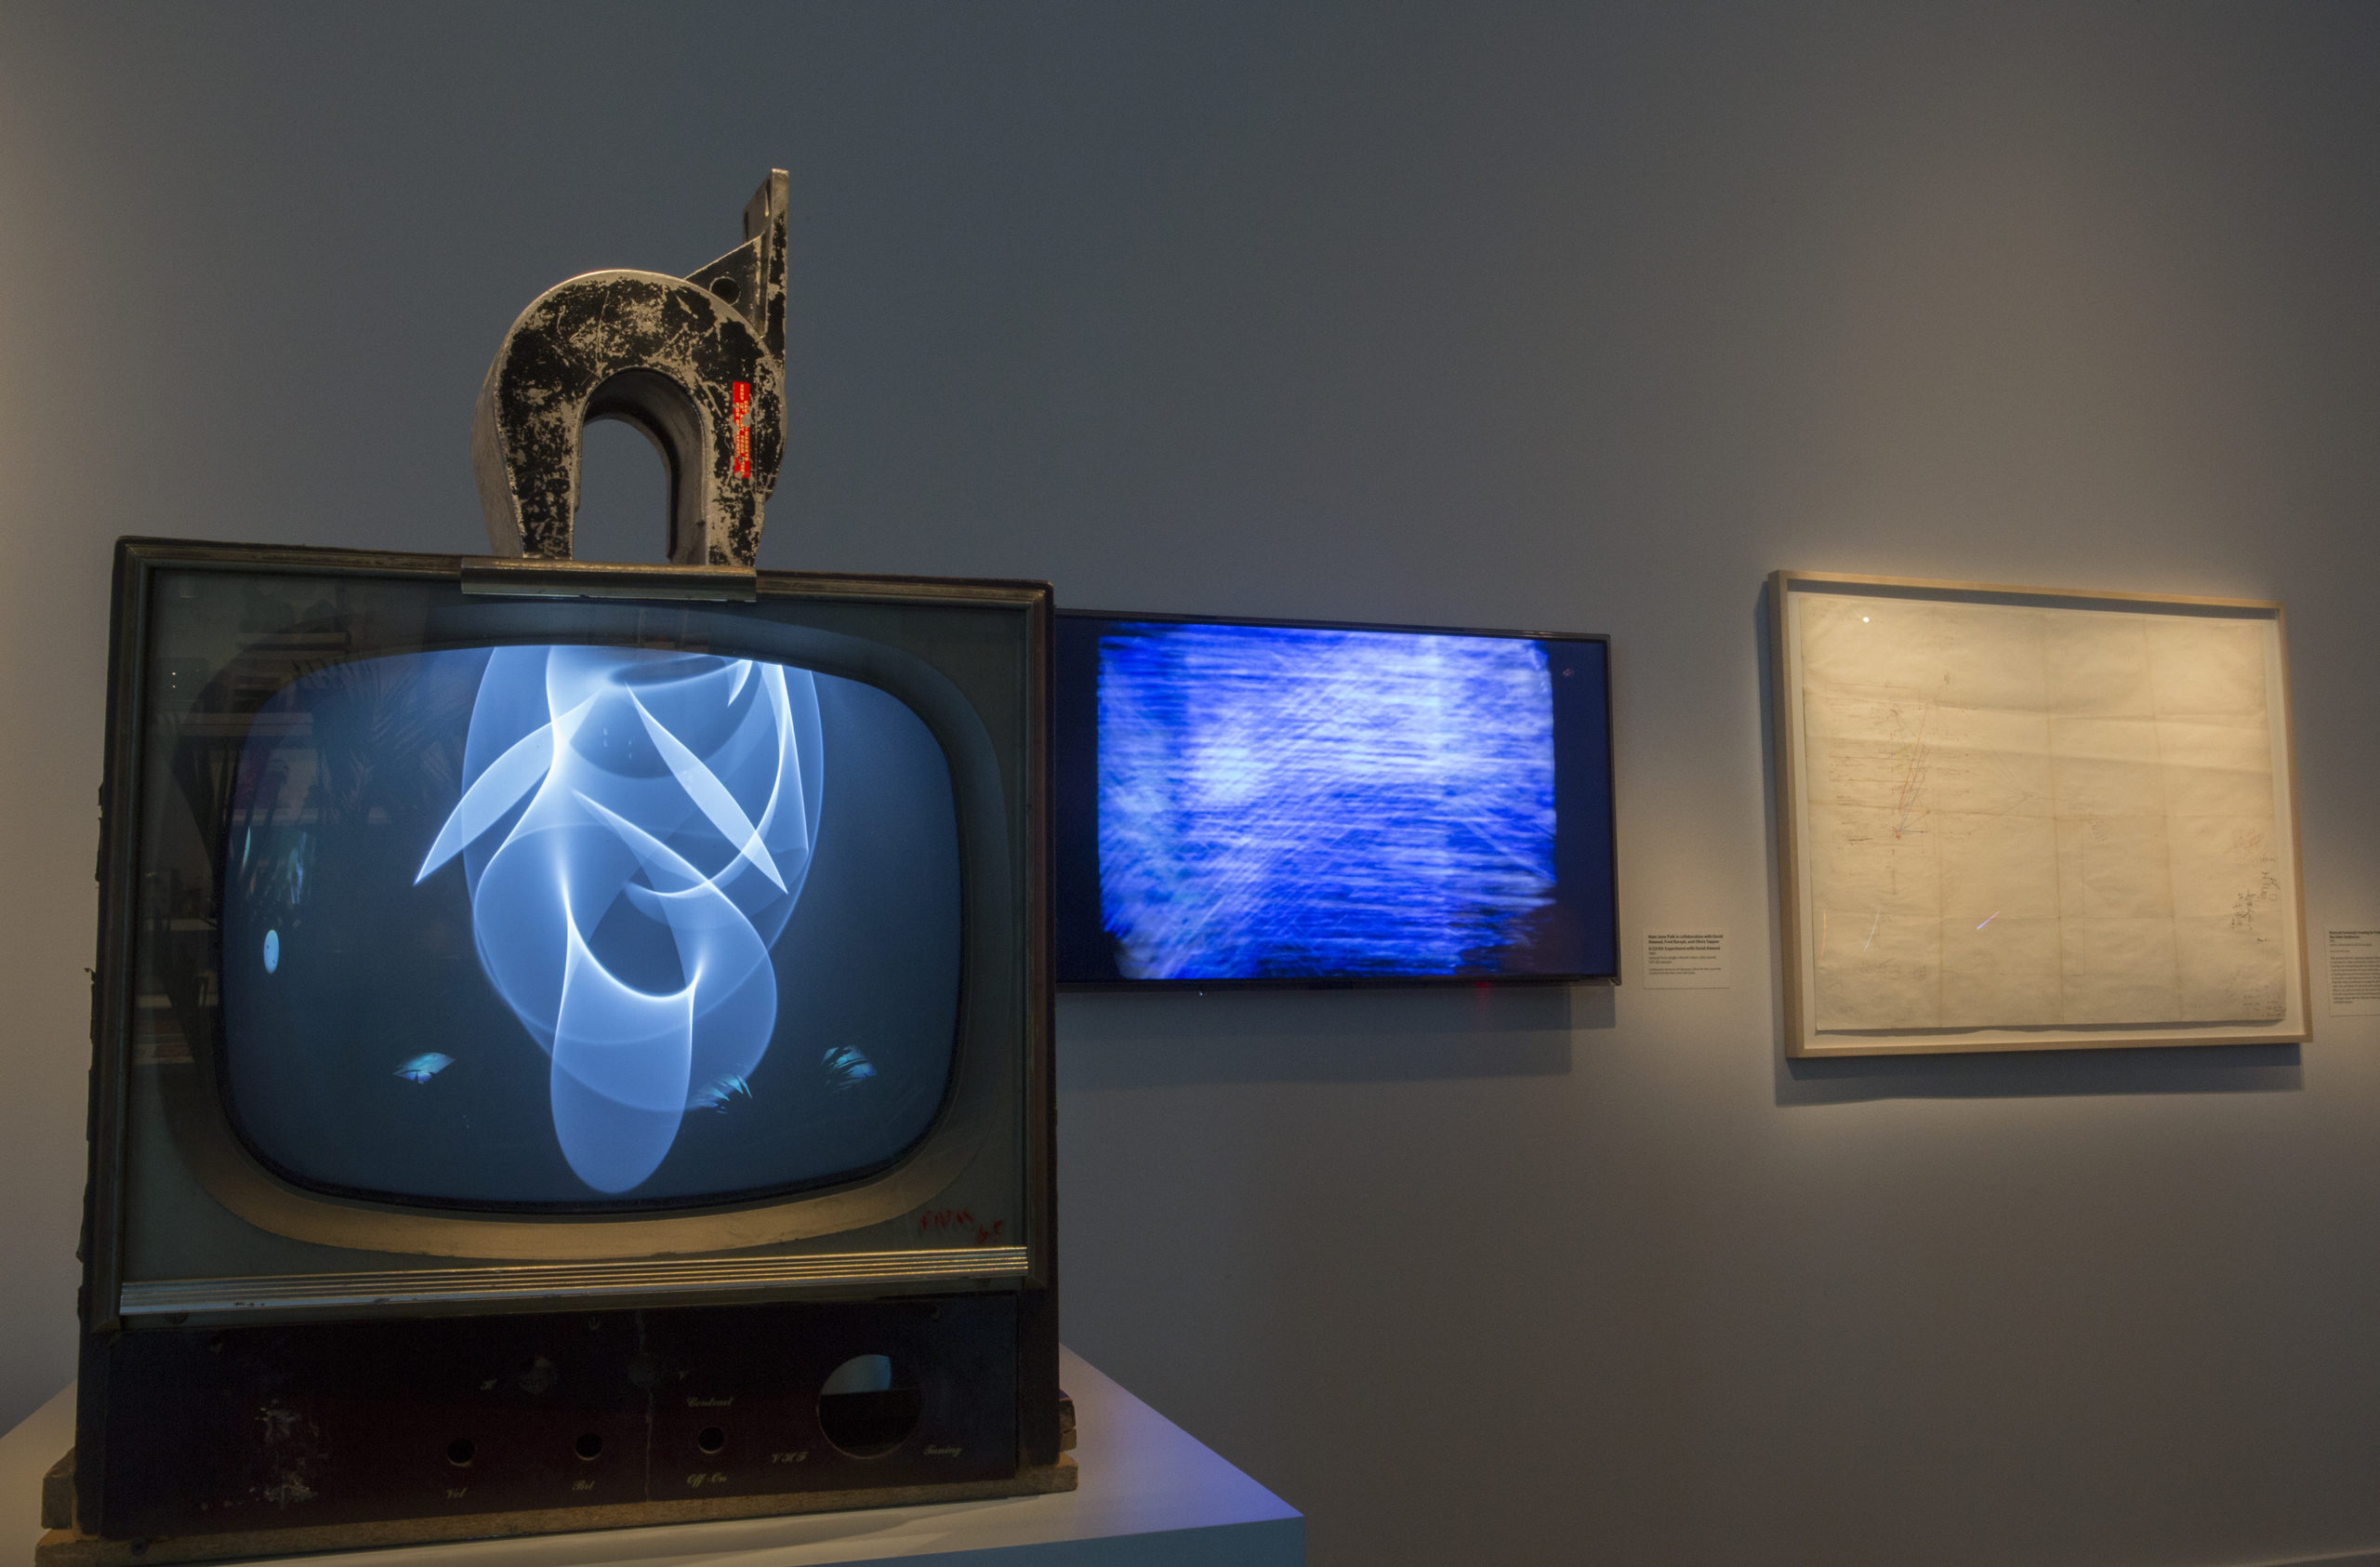 Left: Nam June Paik, Magnet TV, 1965, 17-inch television set and magnet; black and white, silent, 28 3/4 x 19 1/4 x 24 1/2 inches (Whitney Museum of American Art); Center: Nam June Paik in collaboration with David Atwood, Fred Barzyk, and Olivia Tappan, 9/23/69: Experiment with David Atwood, 1969, single-channel video; color, sound (Smithsonian American Art Museum); Right: Nam June Paik, Electronic Schematic Drawing for Paik/Abe Video Synthesizer, 1969, pencil, colored pencil and ink on paper, 30 3/4 x 43 inches (photo: Smithsonian American Art Museum, CC BY-NC-ND 2.0)